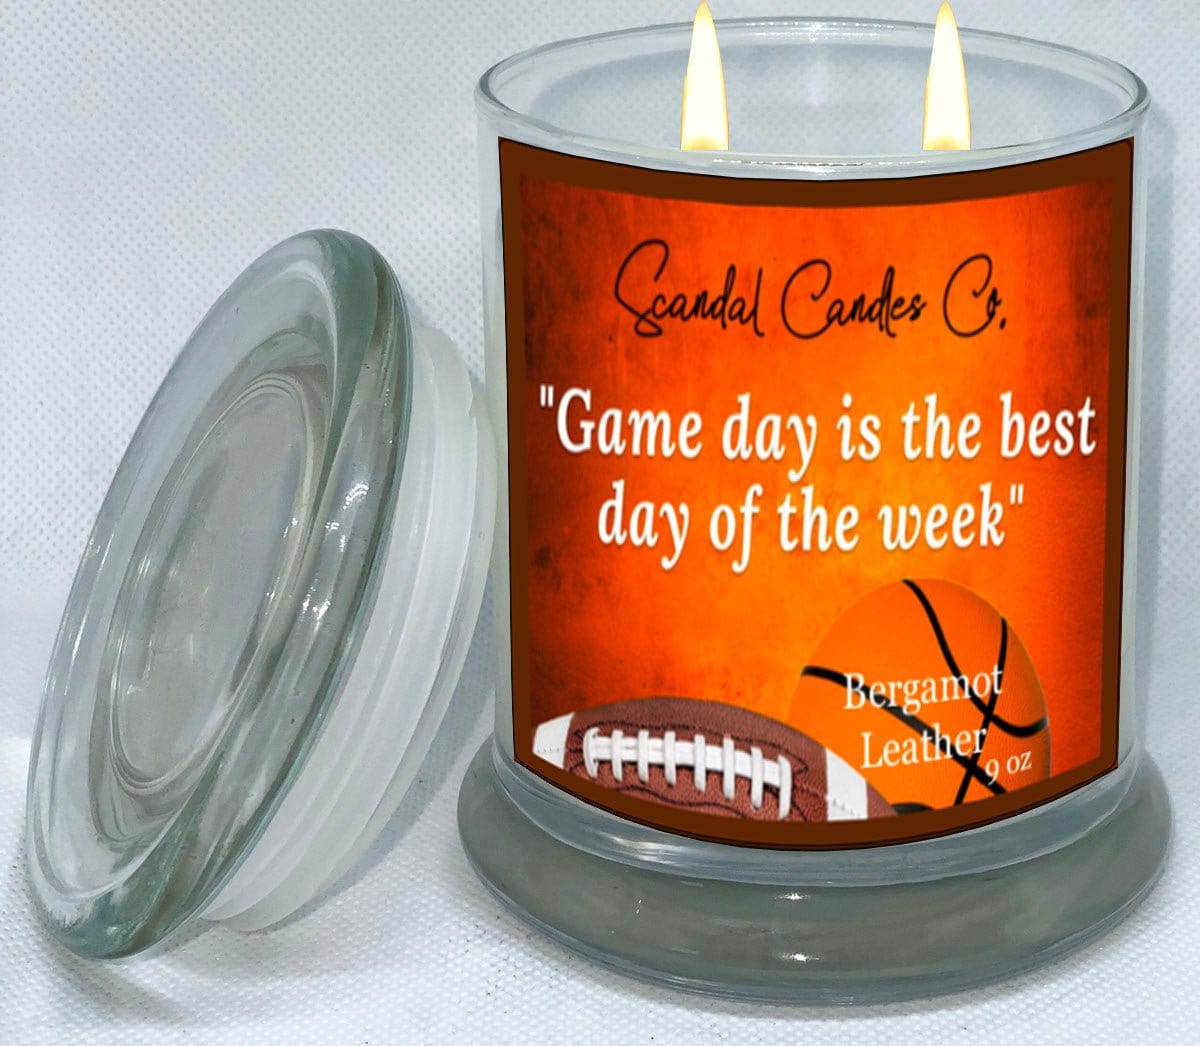 Game Day - Scandal Candles Co.